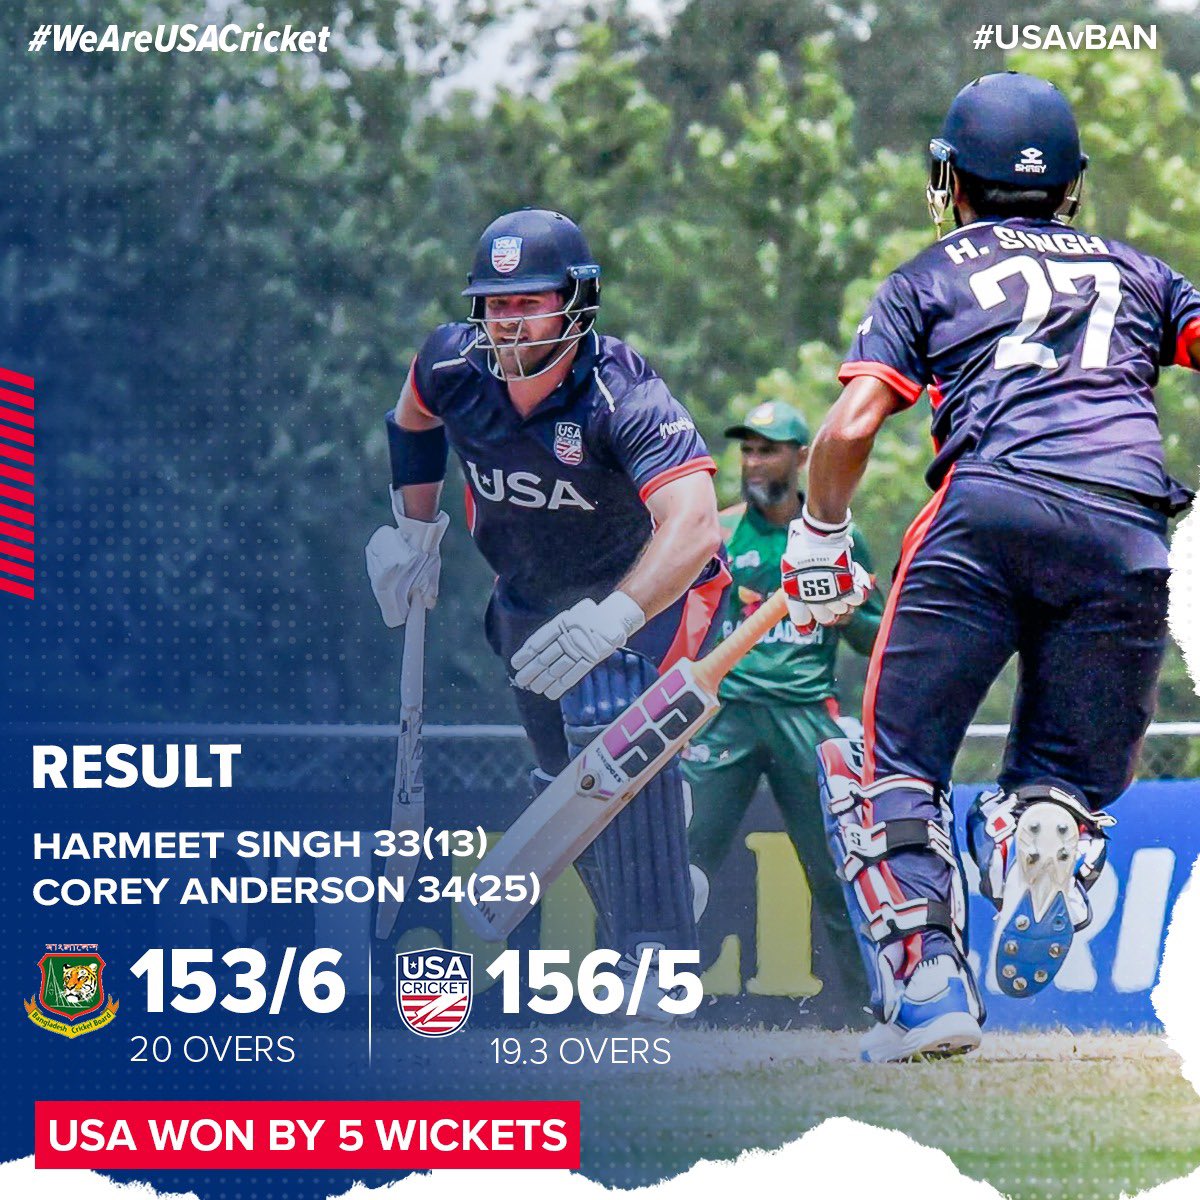 What a win! USA win the first T20i by 5 wickets! 🤩

Stay tuned for the next match on May 23rd! 🏏

#USAvBAN #WeAreUSACricket 🇺🇸